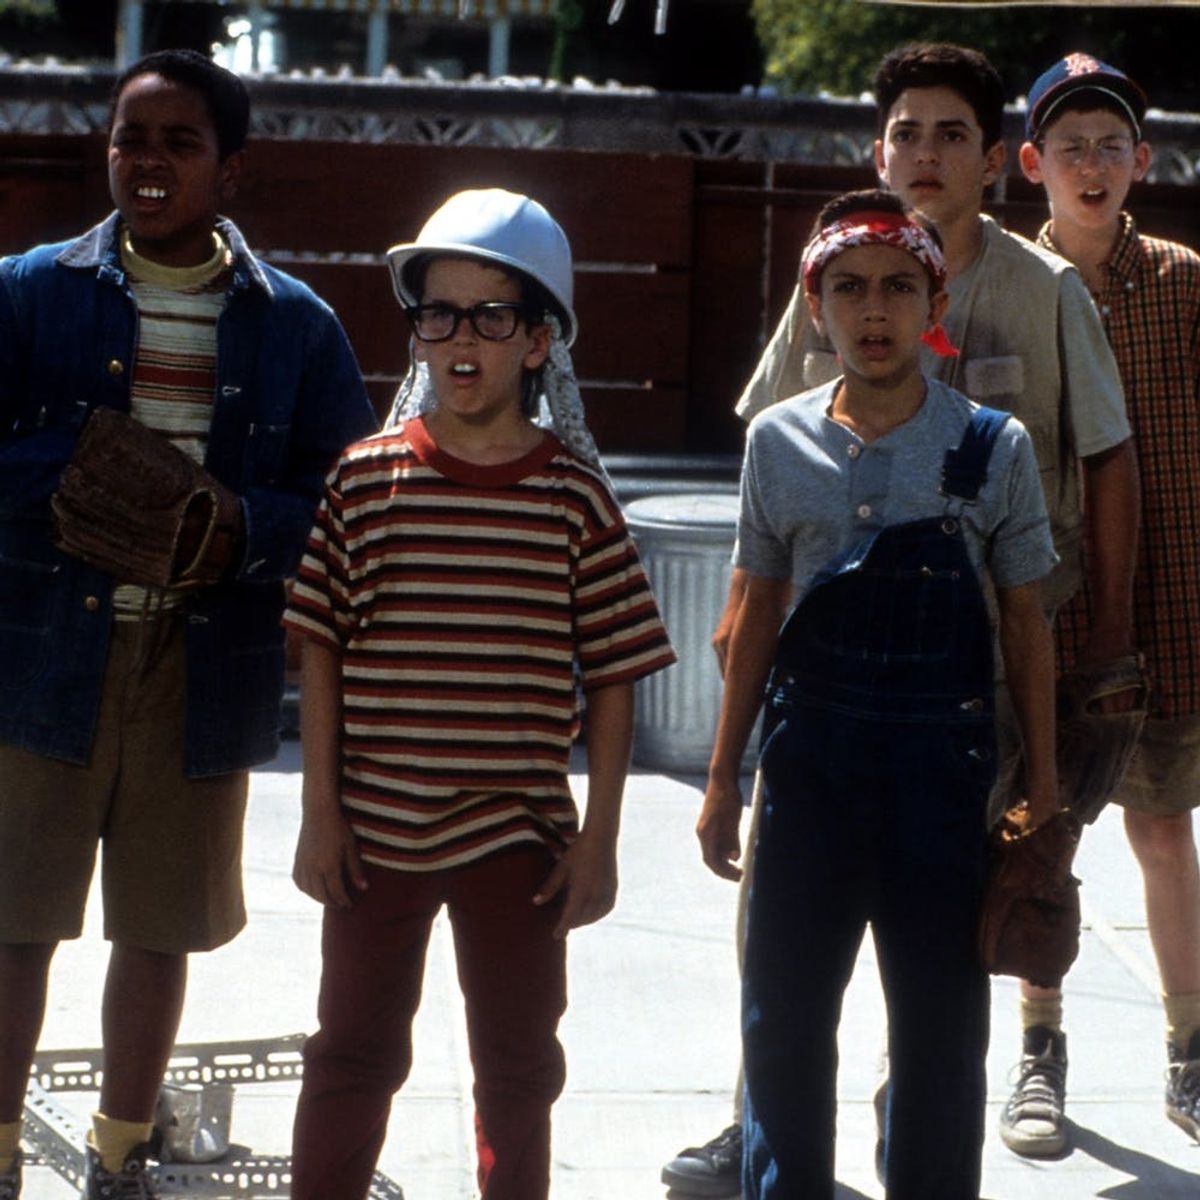 ‘The Sandlot’ Cast Reunited After 25 Years and It’s Giving Us the Best Nostalgic Summer Vibes